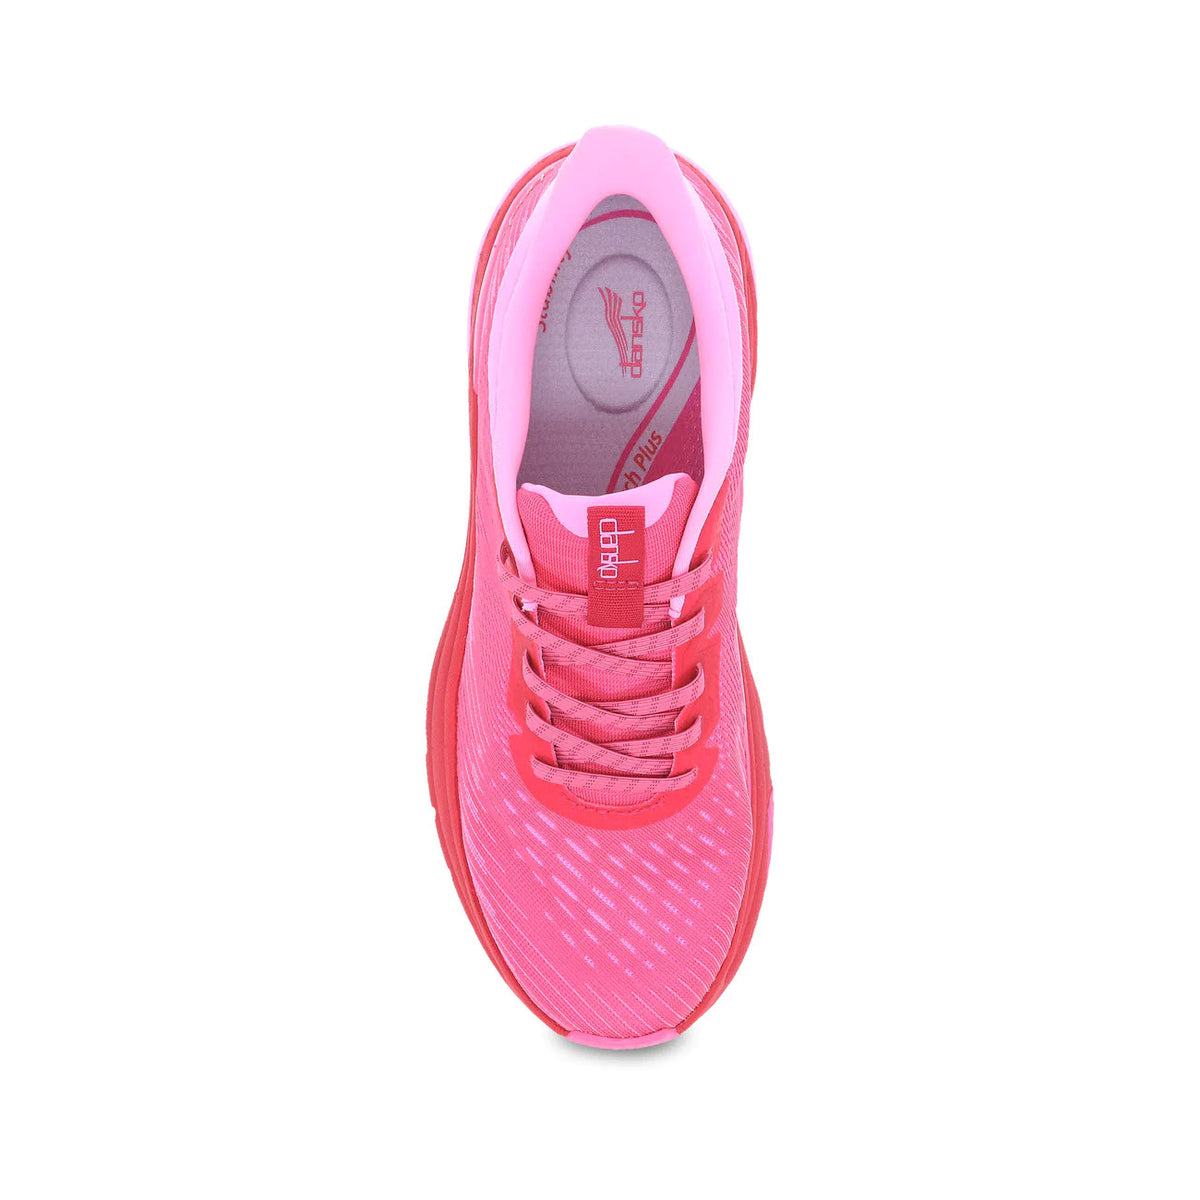 Bright pink high-performance walking sneaker with dotted design, displayed from a top view on a white background - Dansko Peony Hot Pink - Womens.